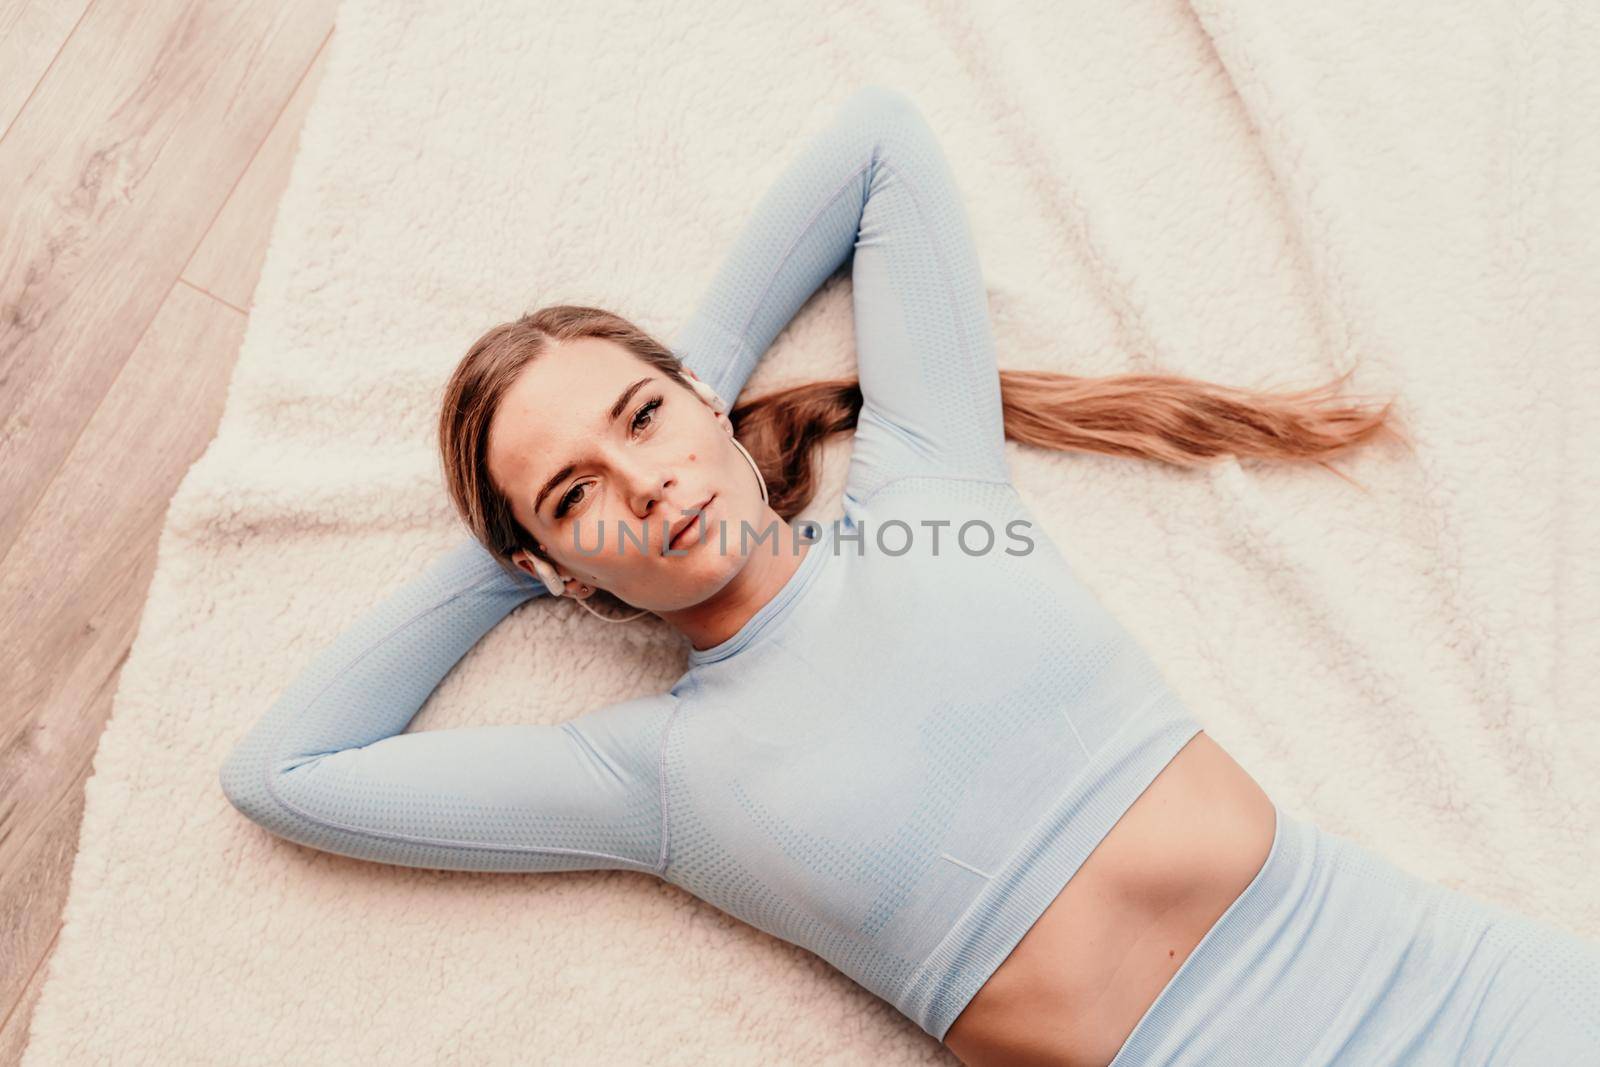 Top view portrait of relaxed woman listening to music with headphones lying on carpet at home. She wears a blue suit with long hair pulled back into a ponytail